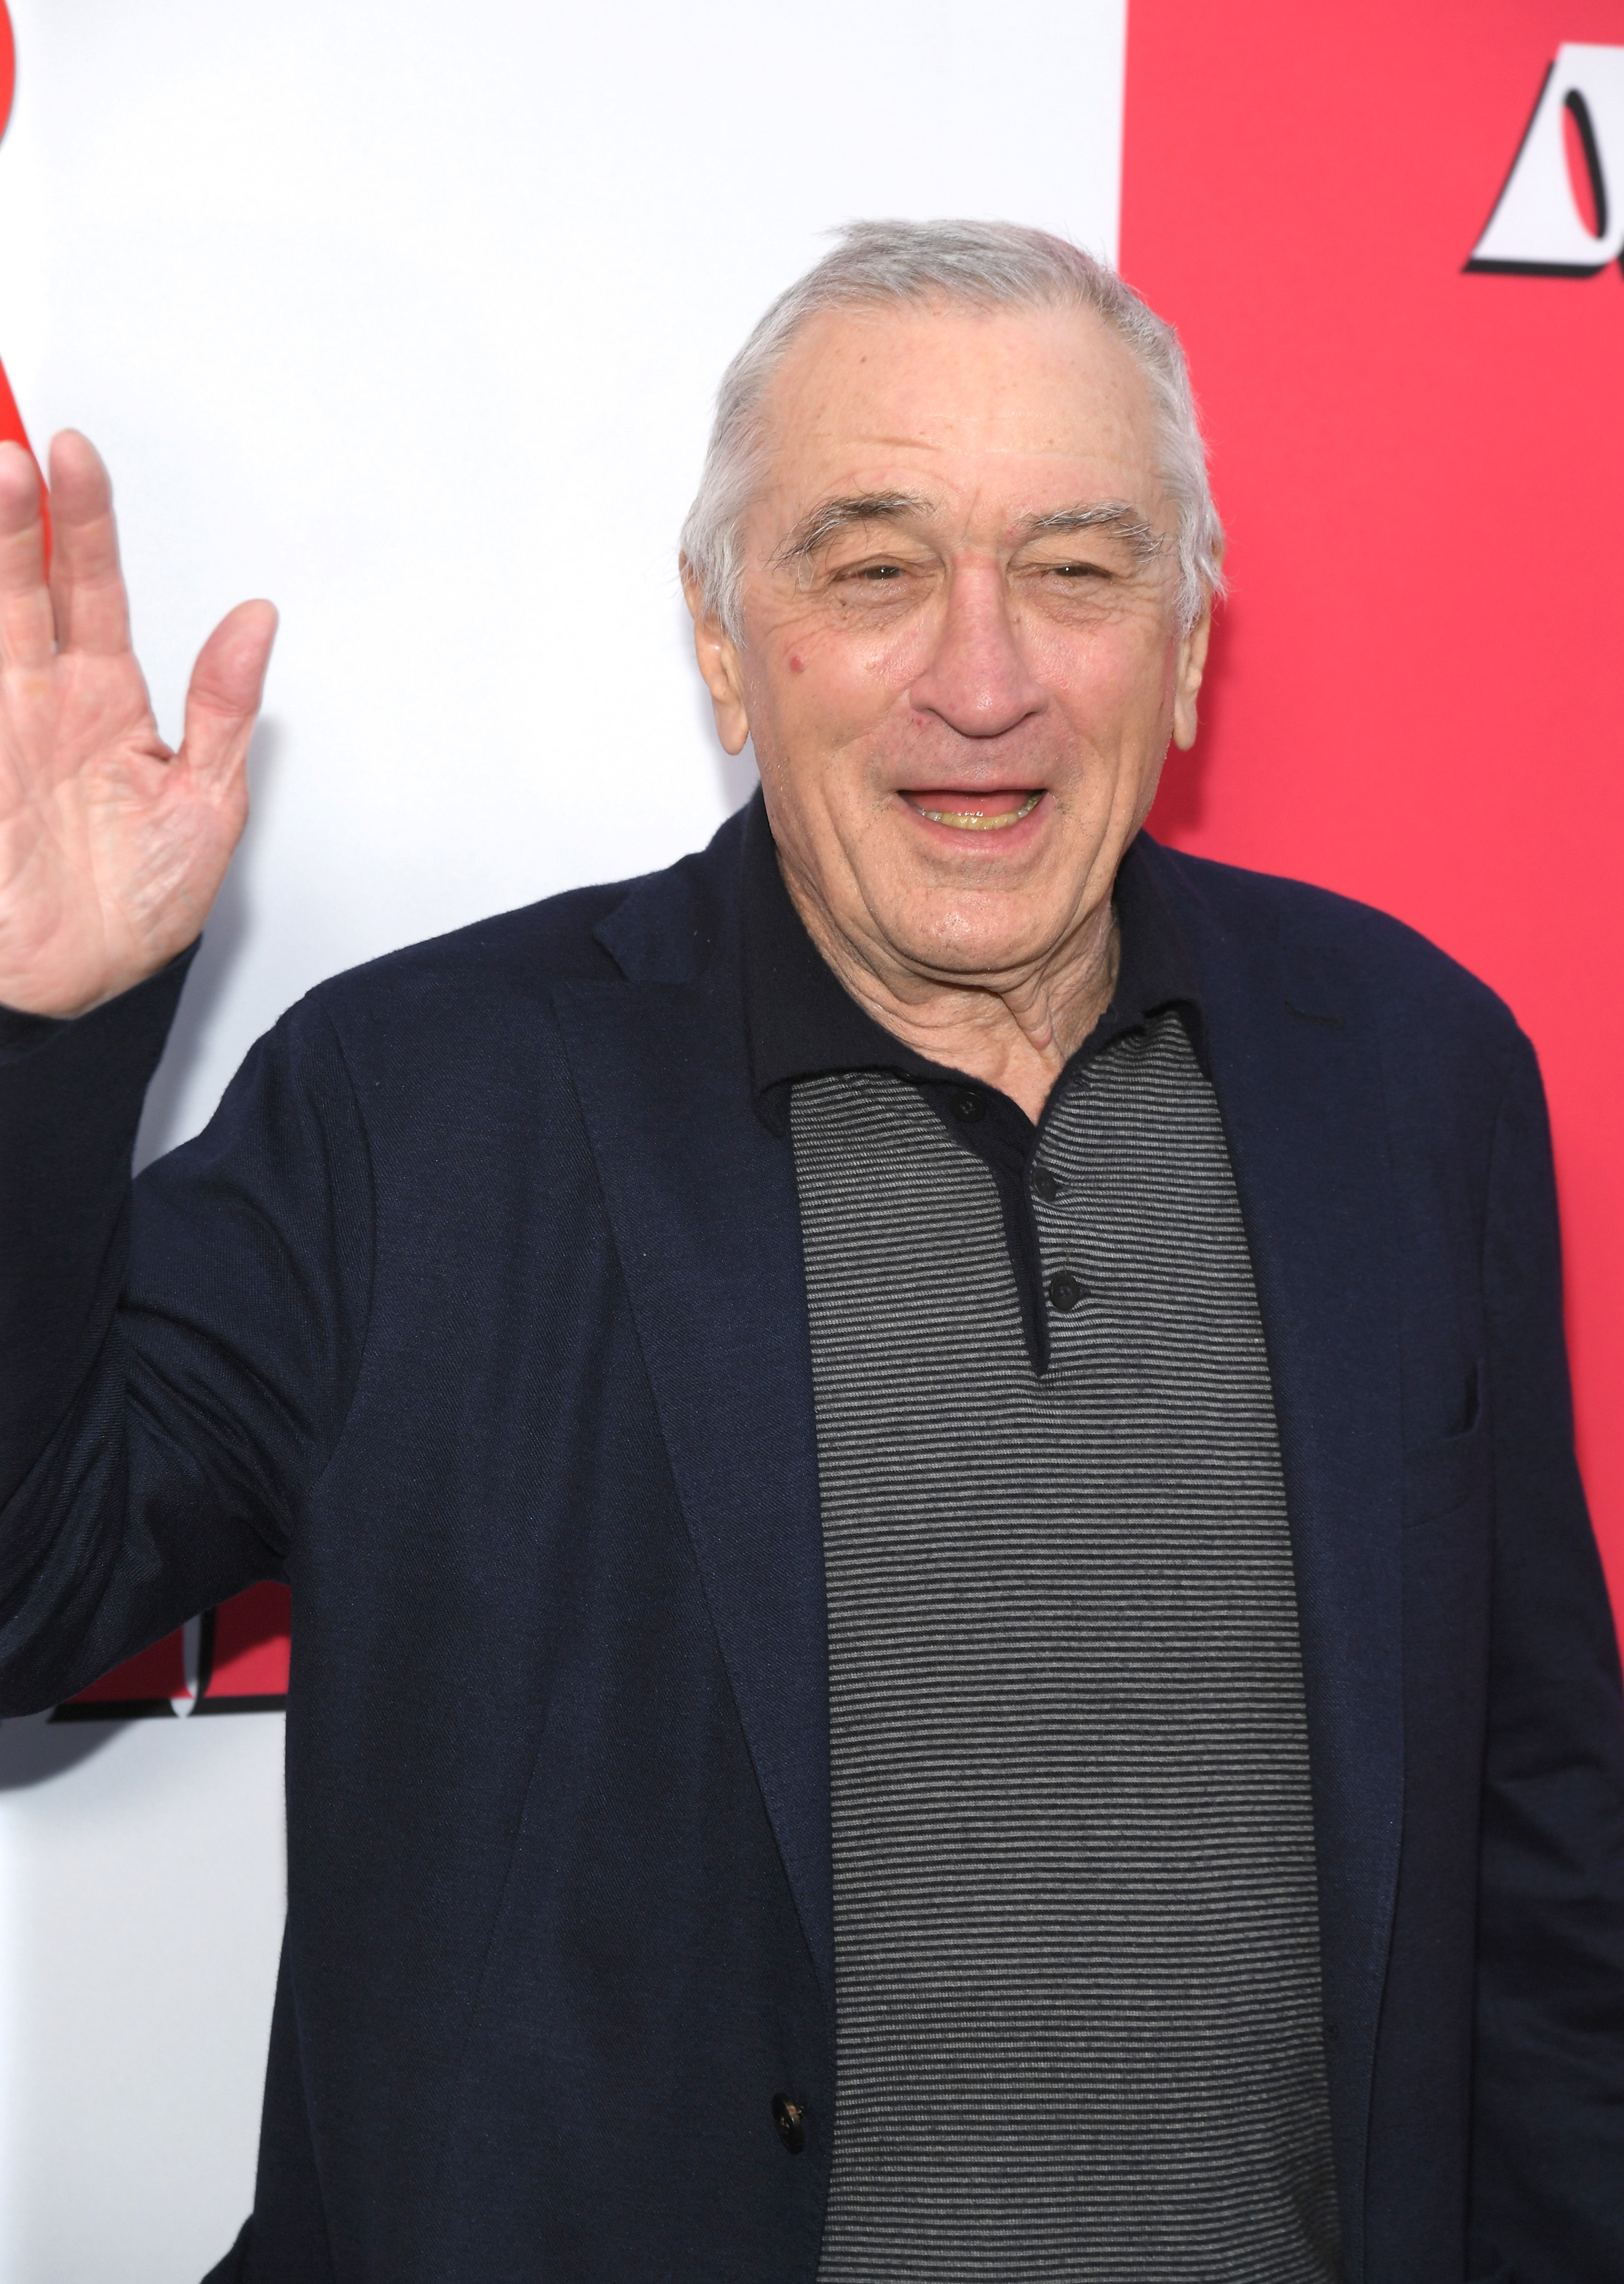 Robert De Niro at the premiere of "About My Father" at the SVA Theater, in May 2023 | Source: Getty Images